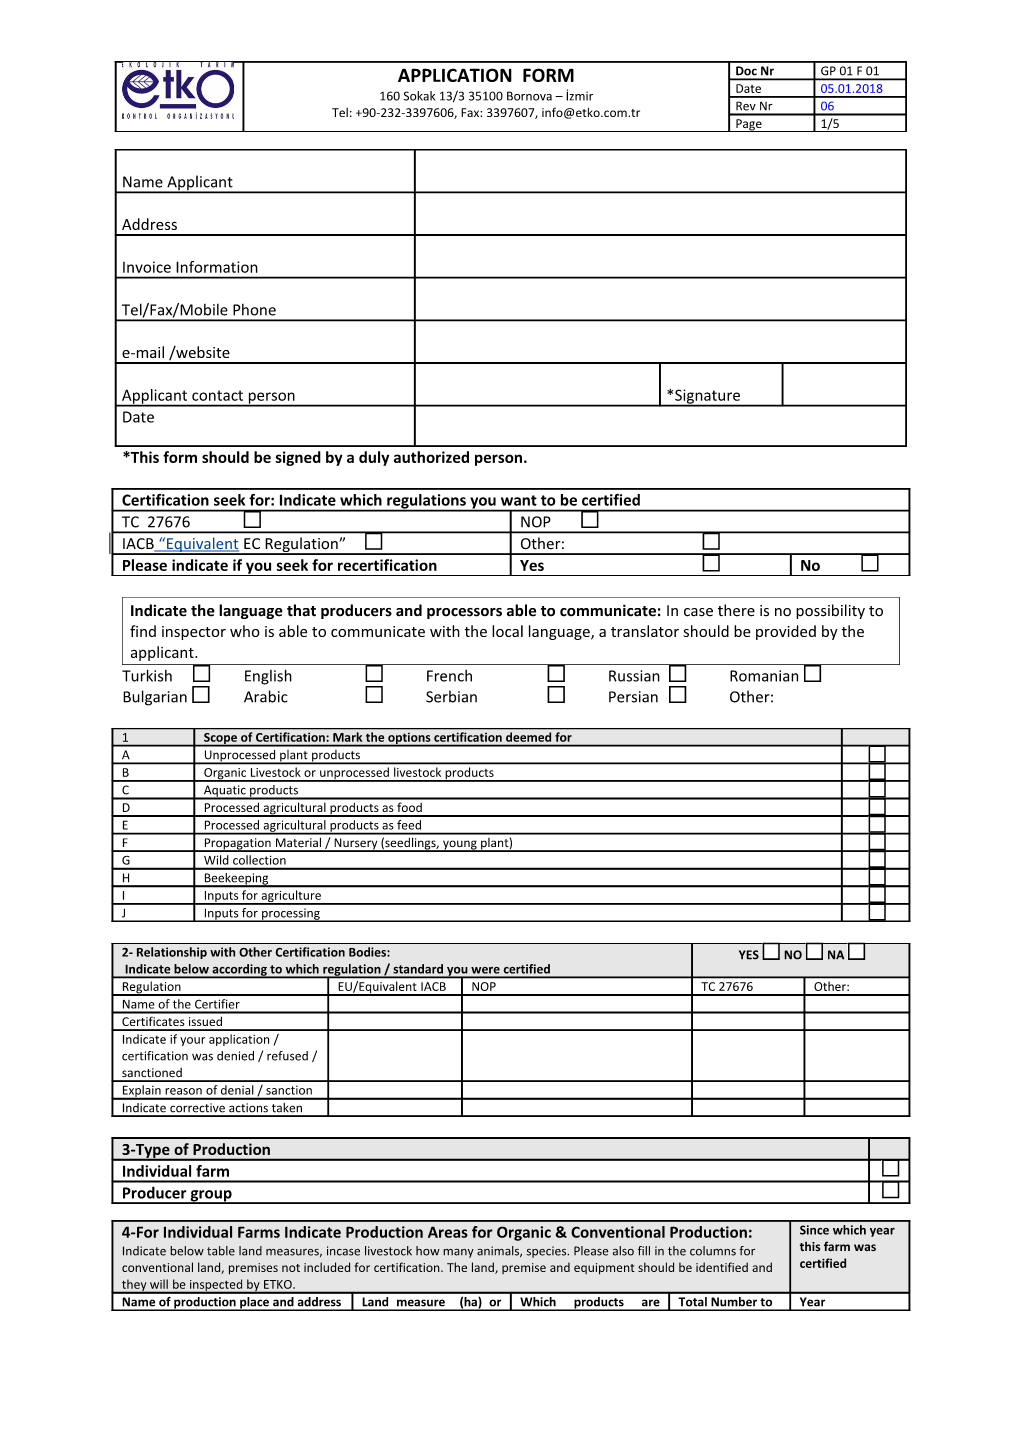 *This Form Should Be Signed by a Duly Authorized Person